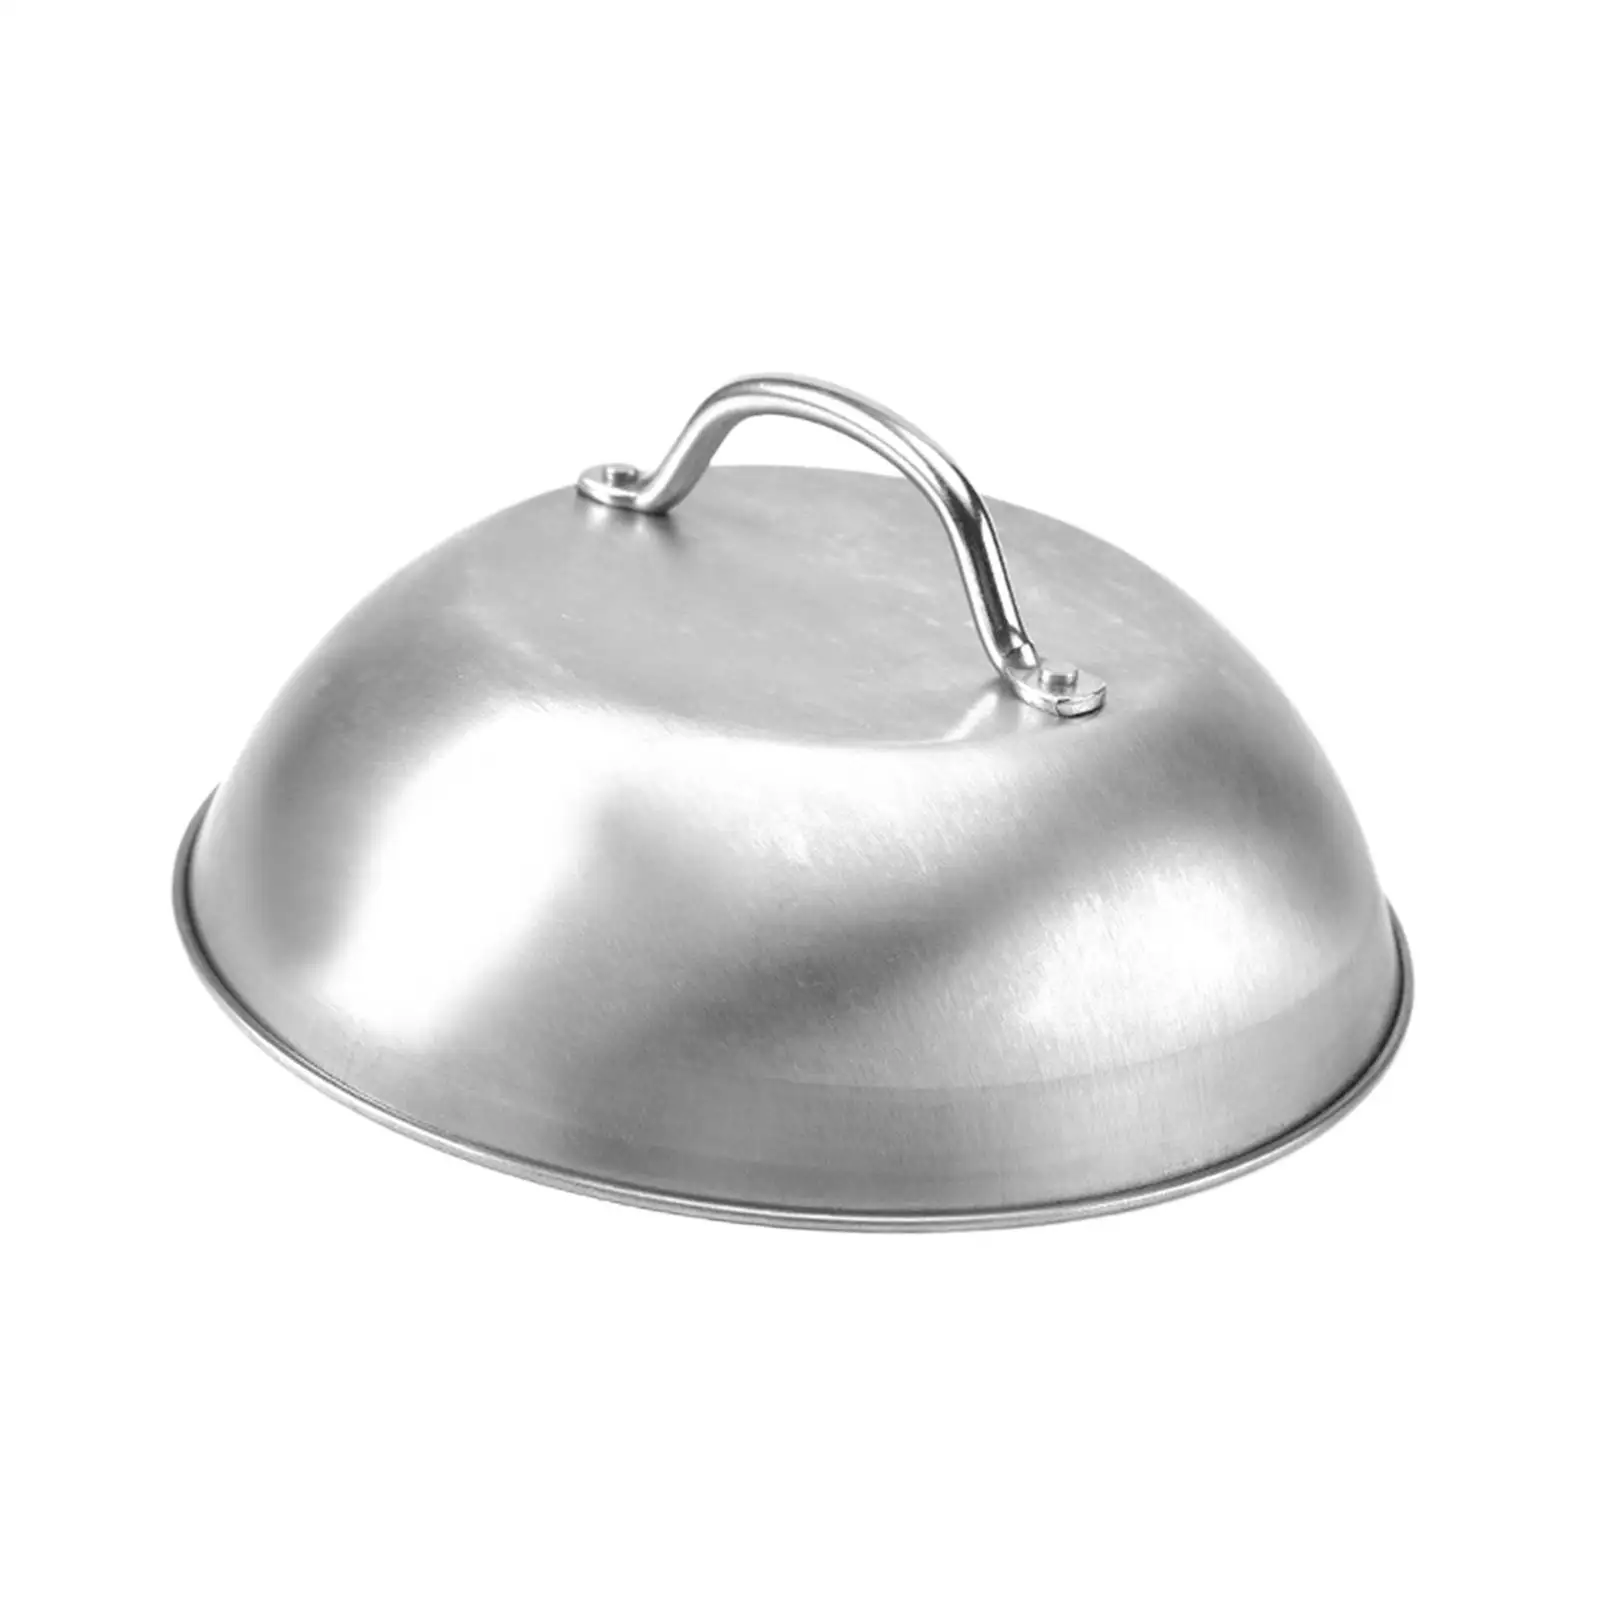 Stainless Steel Basting Covers Steak Cover for Cooking Household Store